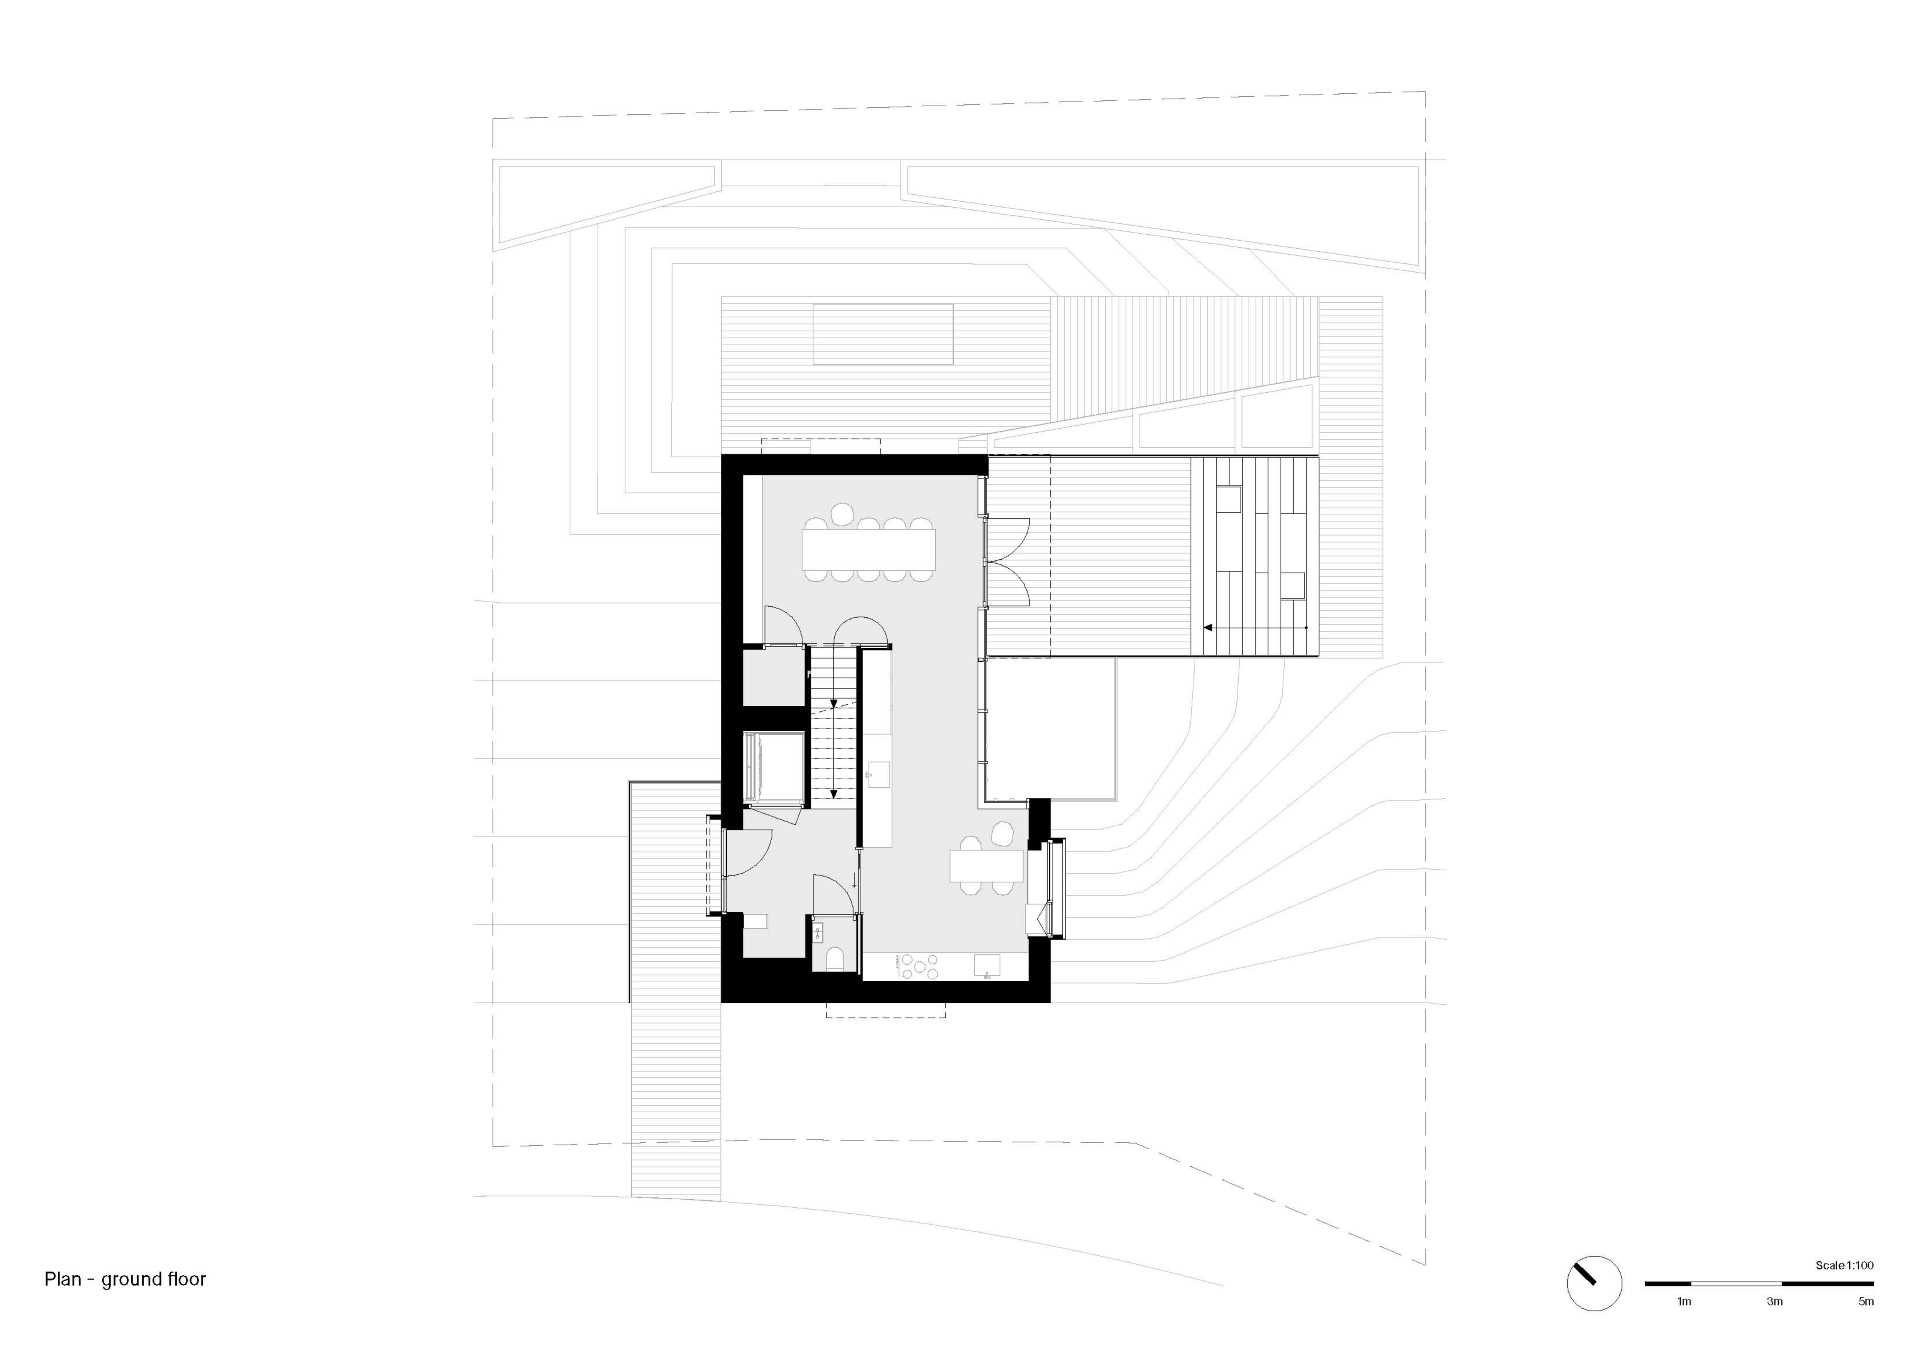 The ground floor plan of a modern house.